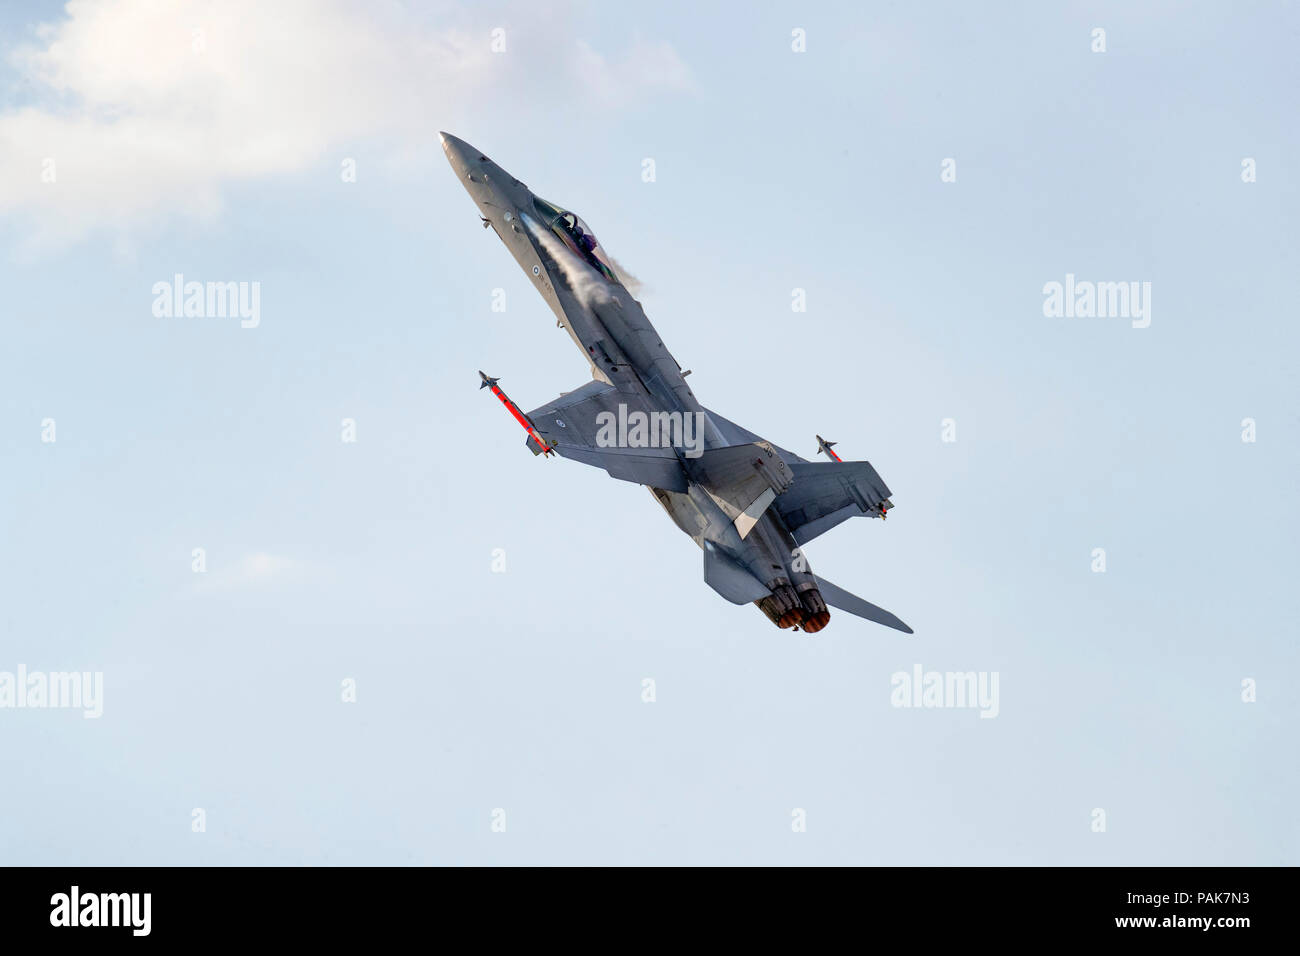 Finnish Airforce McDonnell-Douglas F-18 Hornet military jet aircraft flying at the 2018 Royal International Air Tattoo Stock Photo